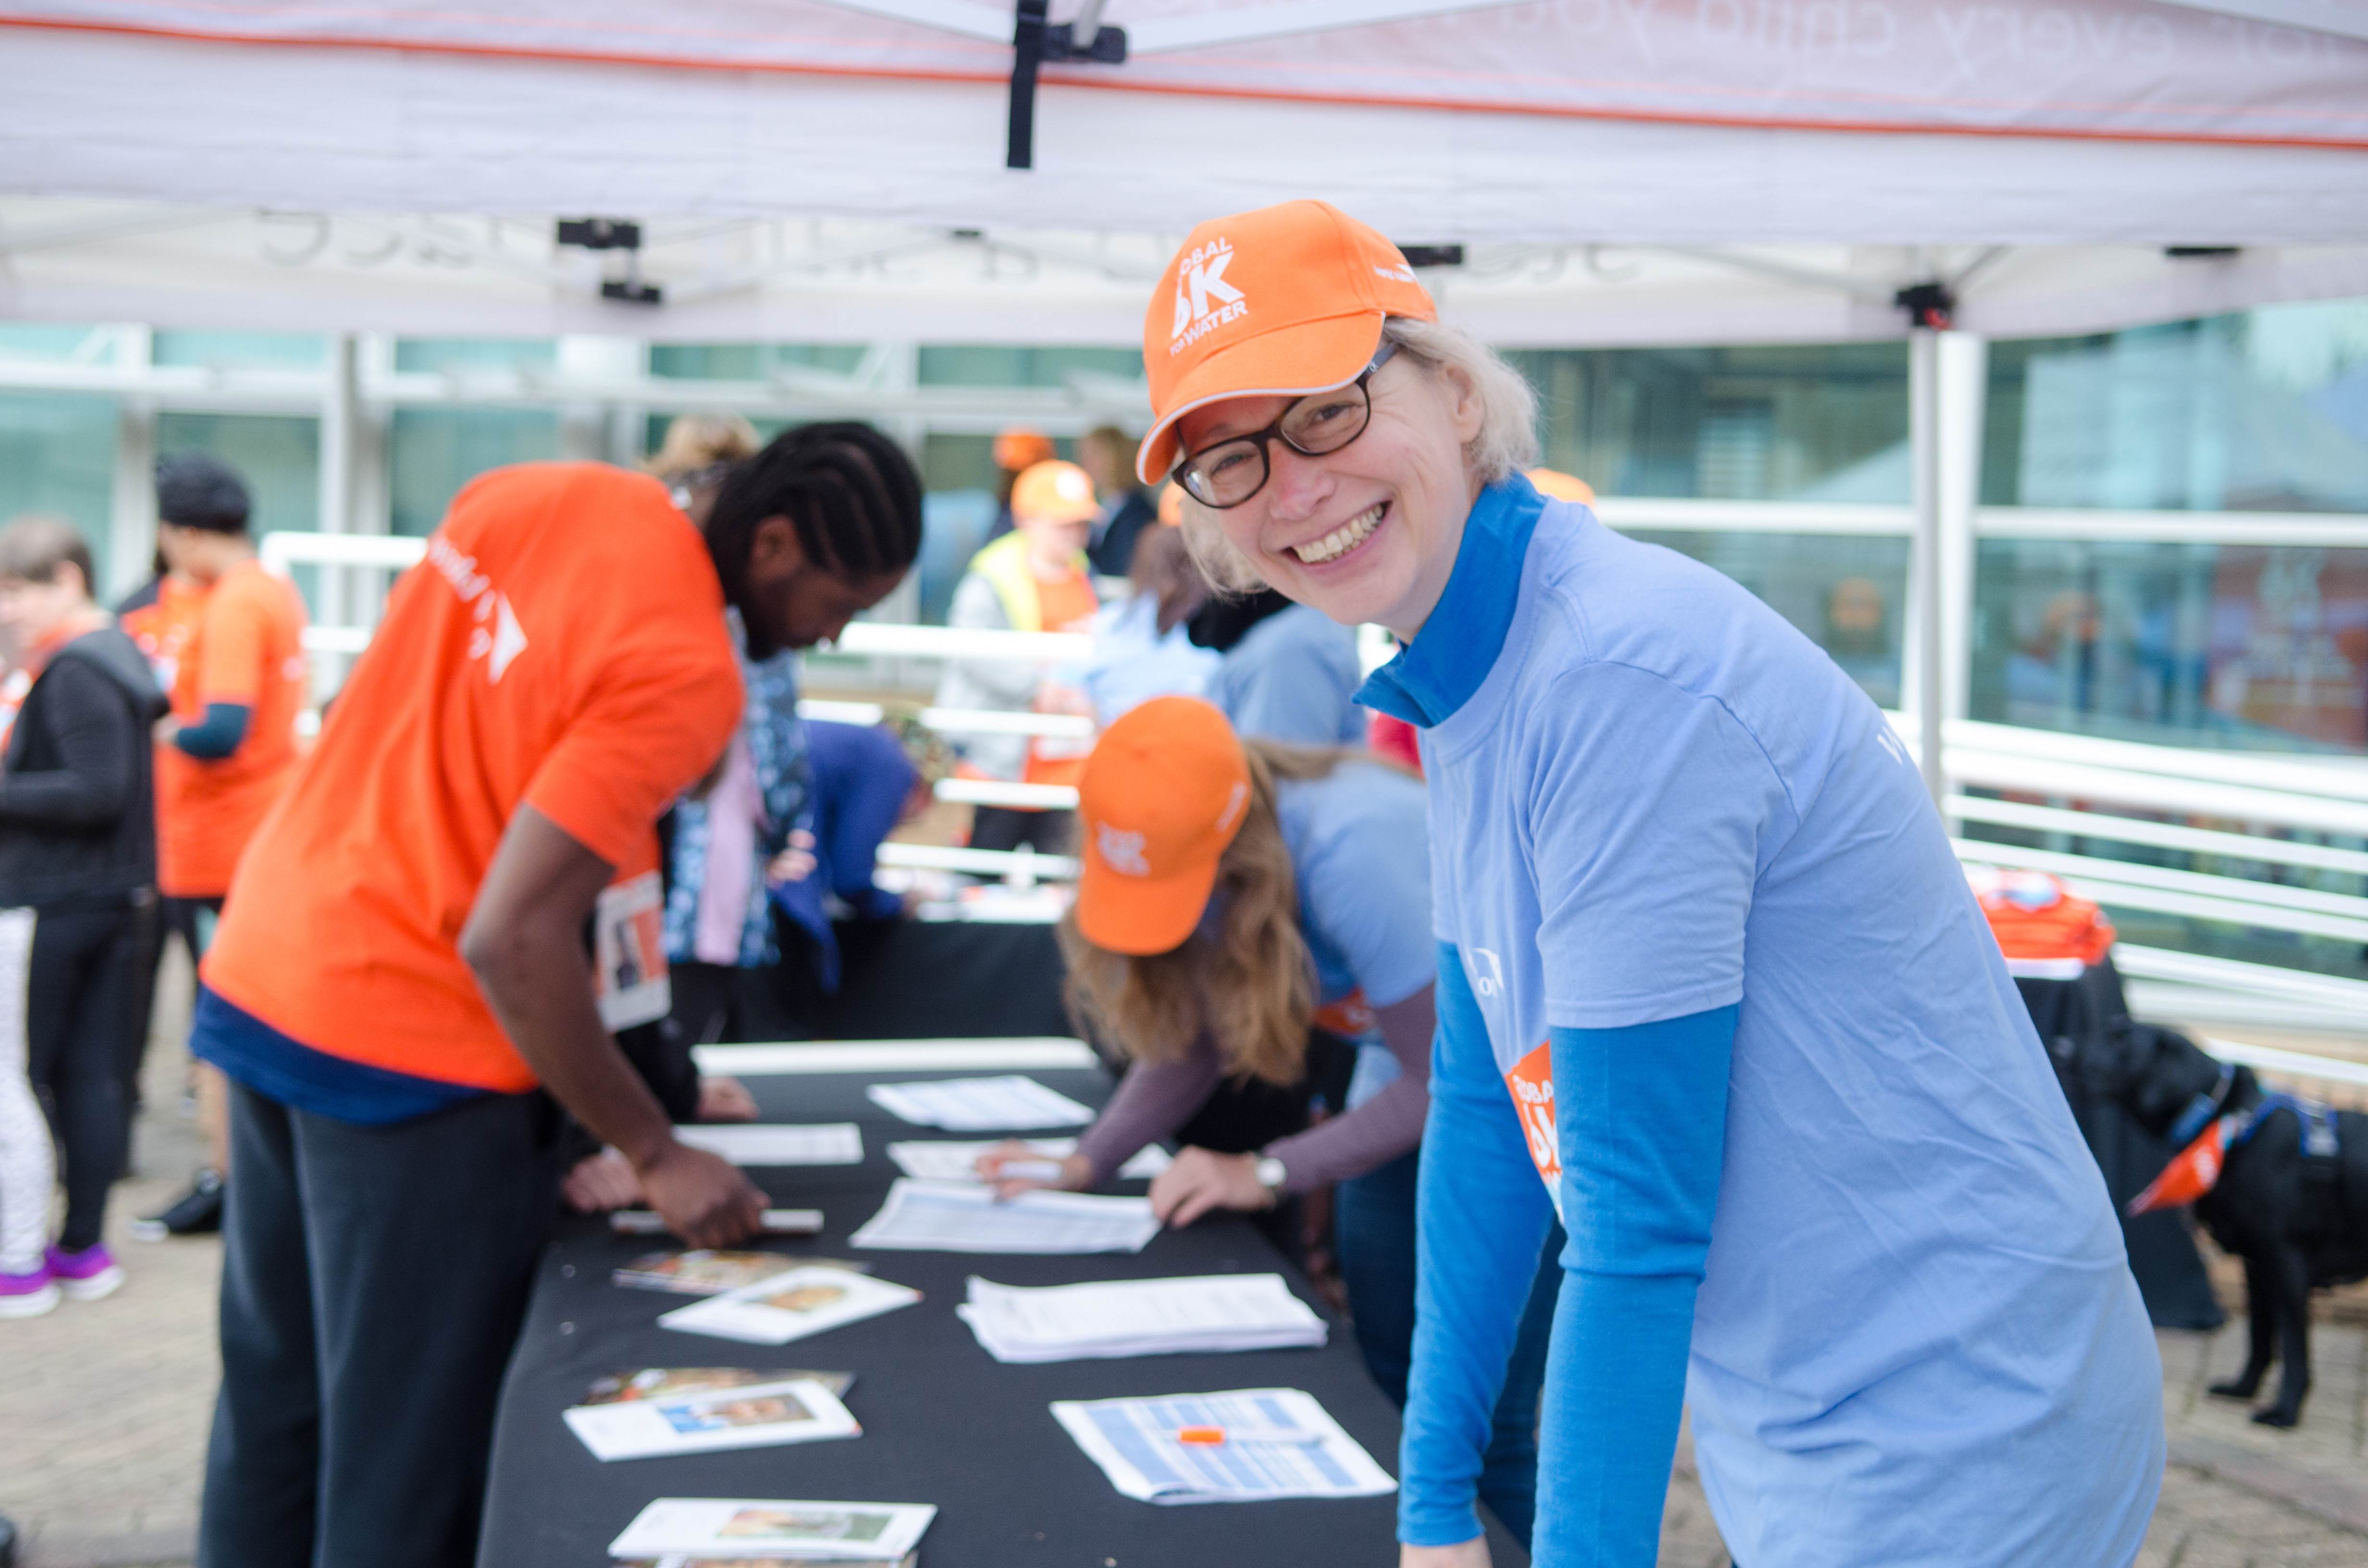 A volunteer gets involved at a World Vision event helping to register participants at an event